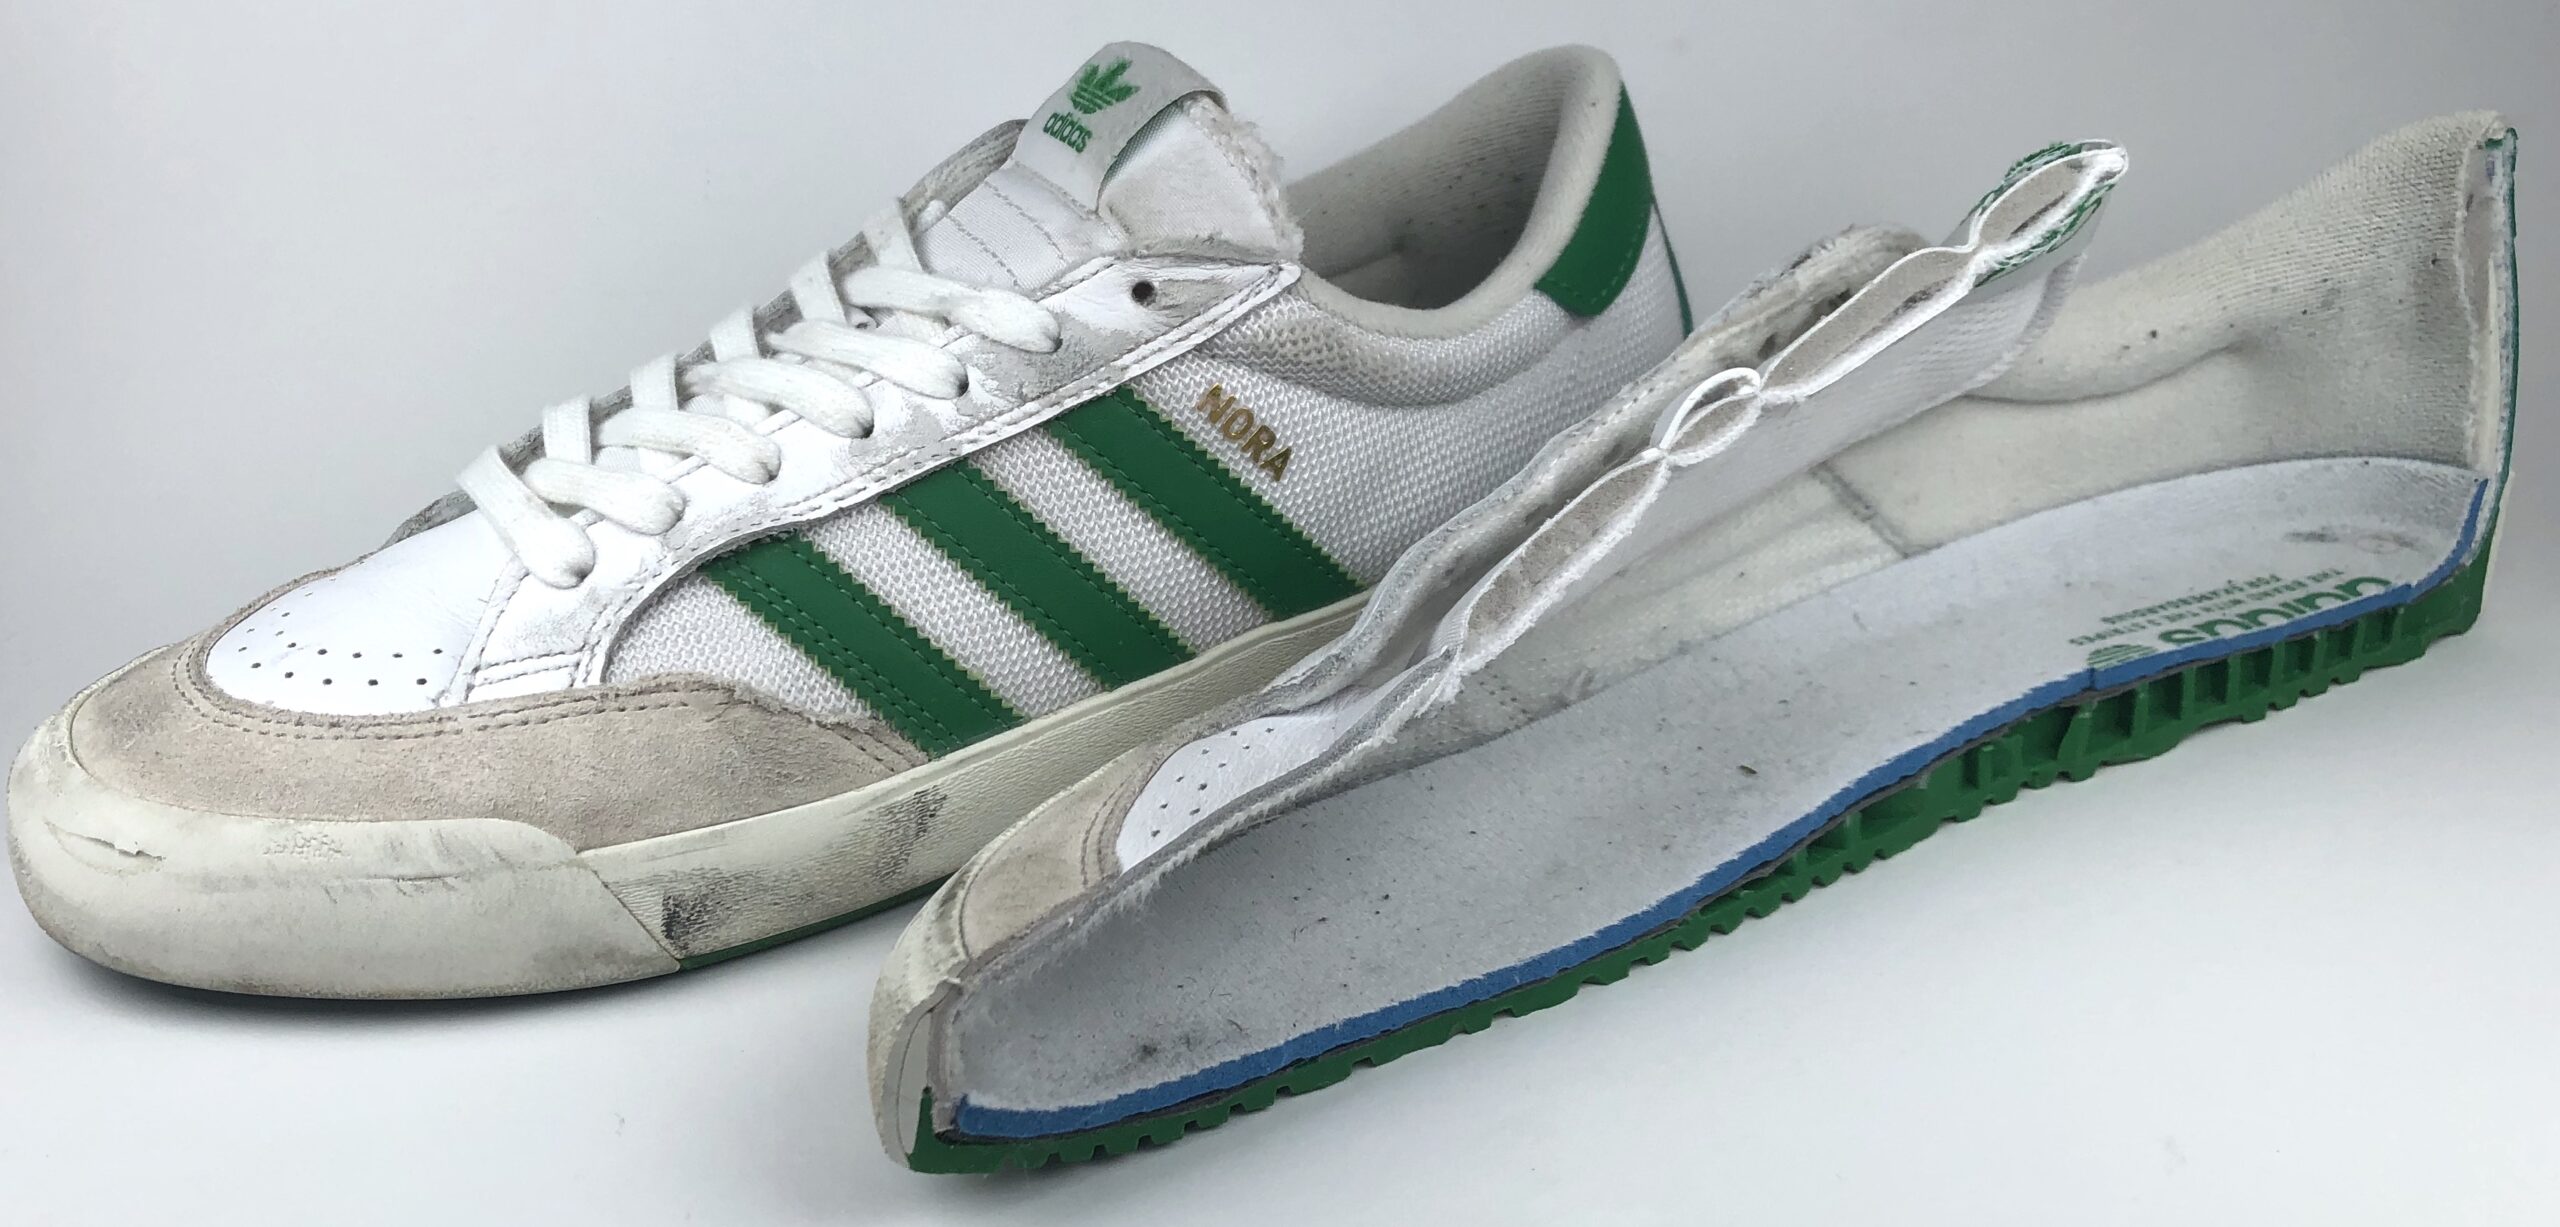 adidas Archives - detailed skate shoe reviews